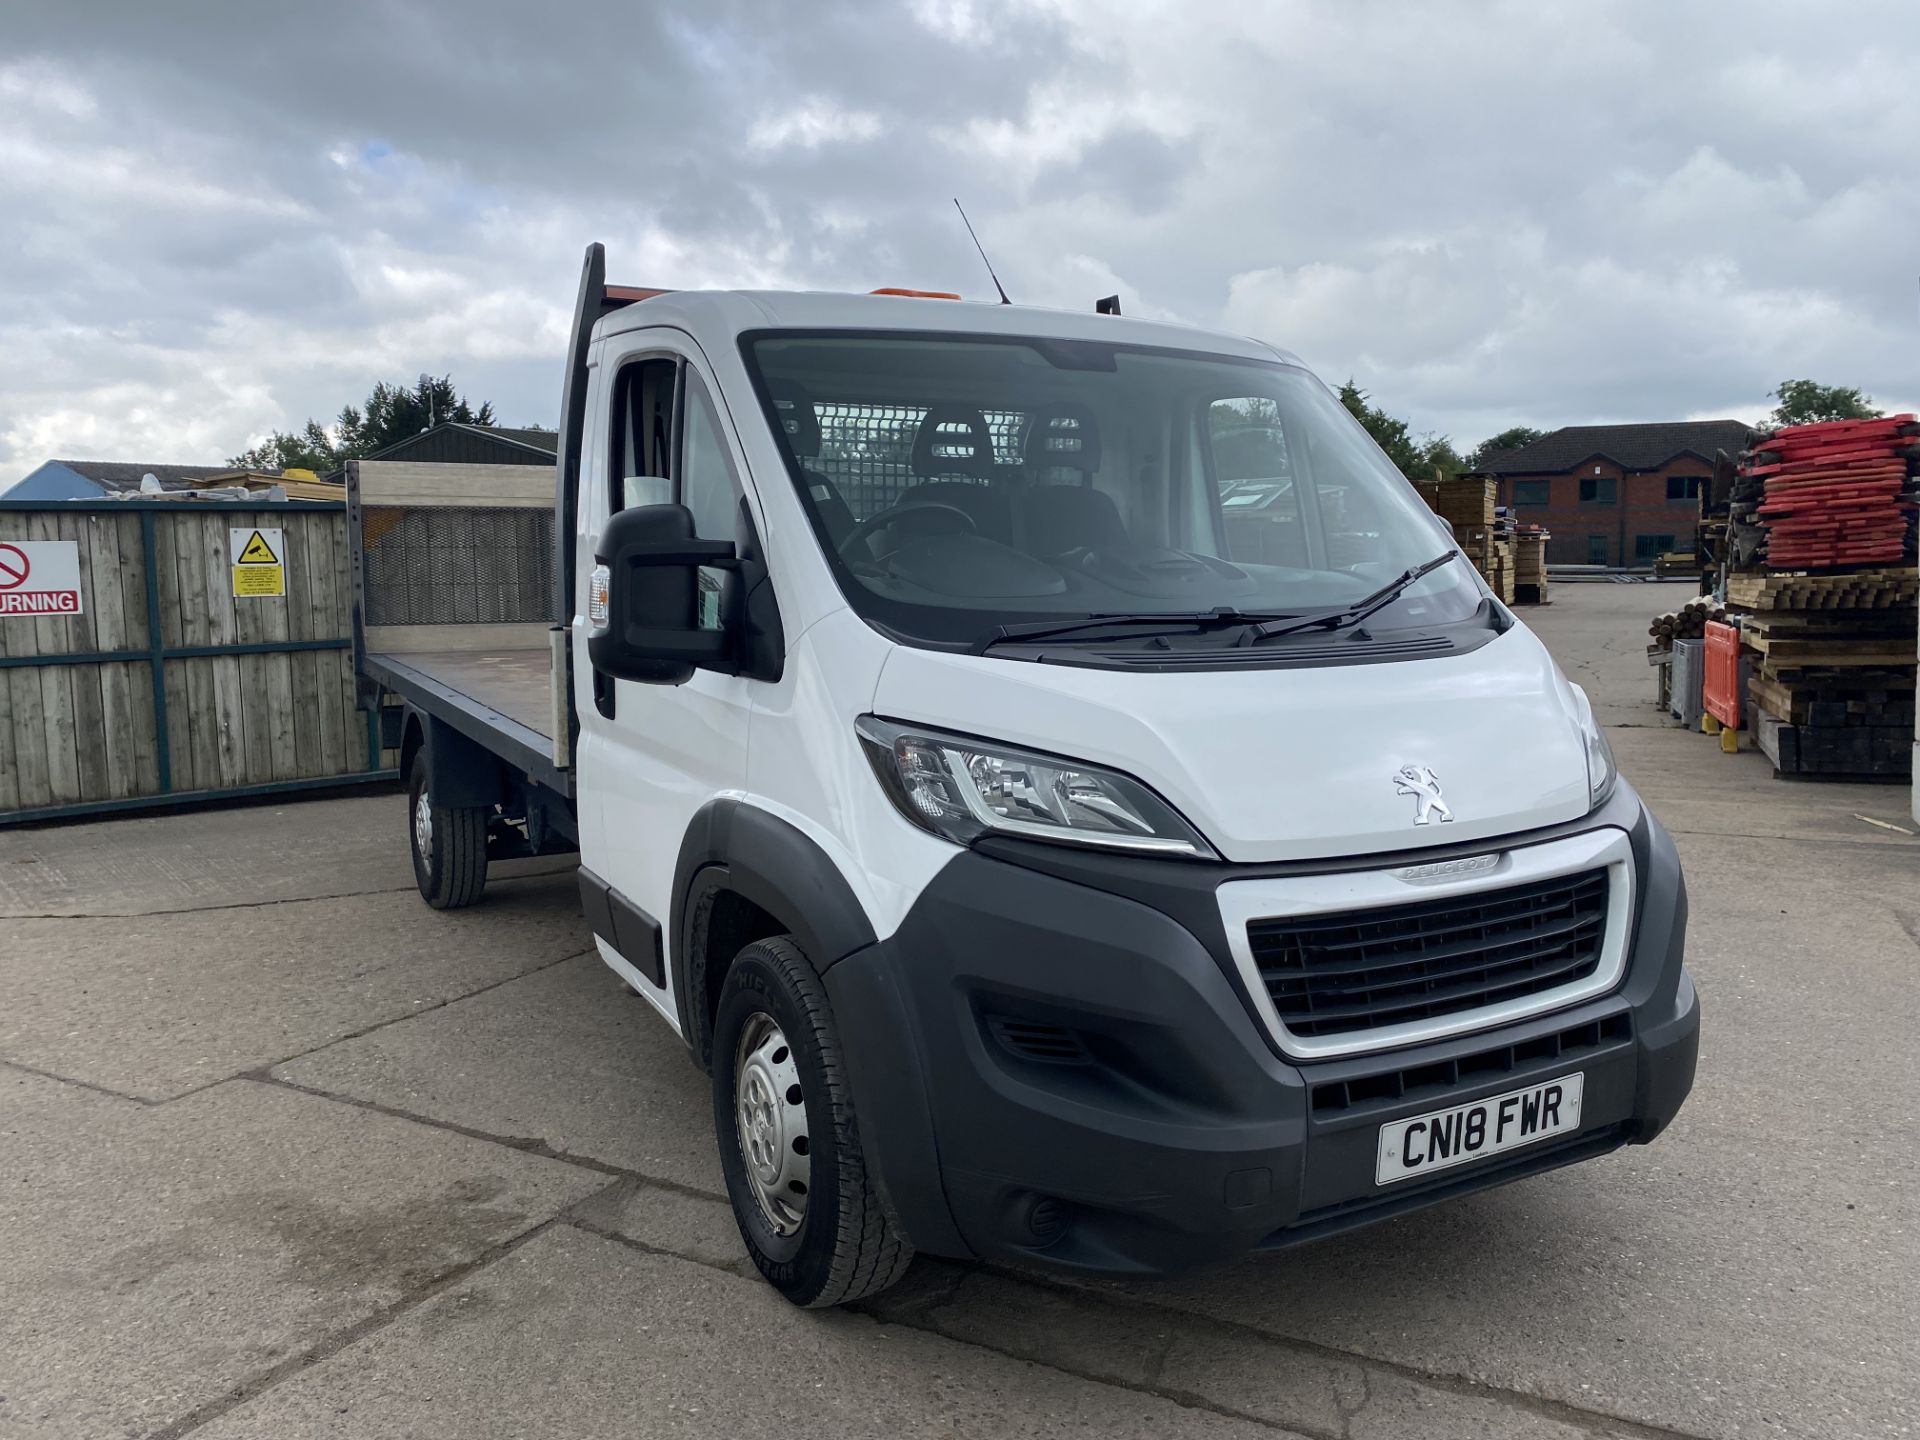 PEUGEOT BOXER 435 L4 2.0HDI START/STOP "LWB FLATBED WITH ELECTRIC TAIL LIFT -EURO 6 ADD BLUE -18 REG - Image 2 of 15